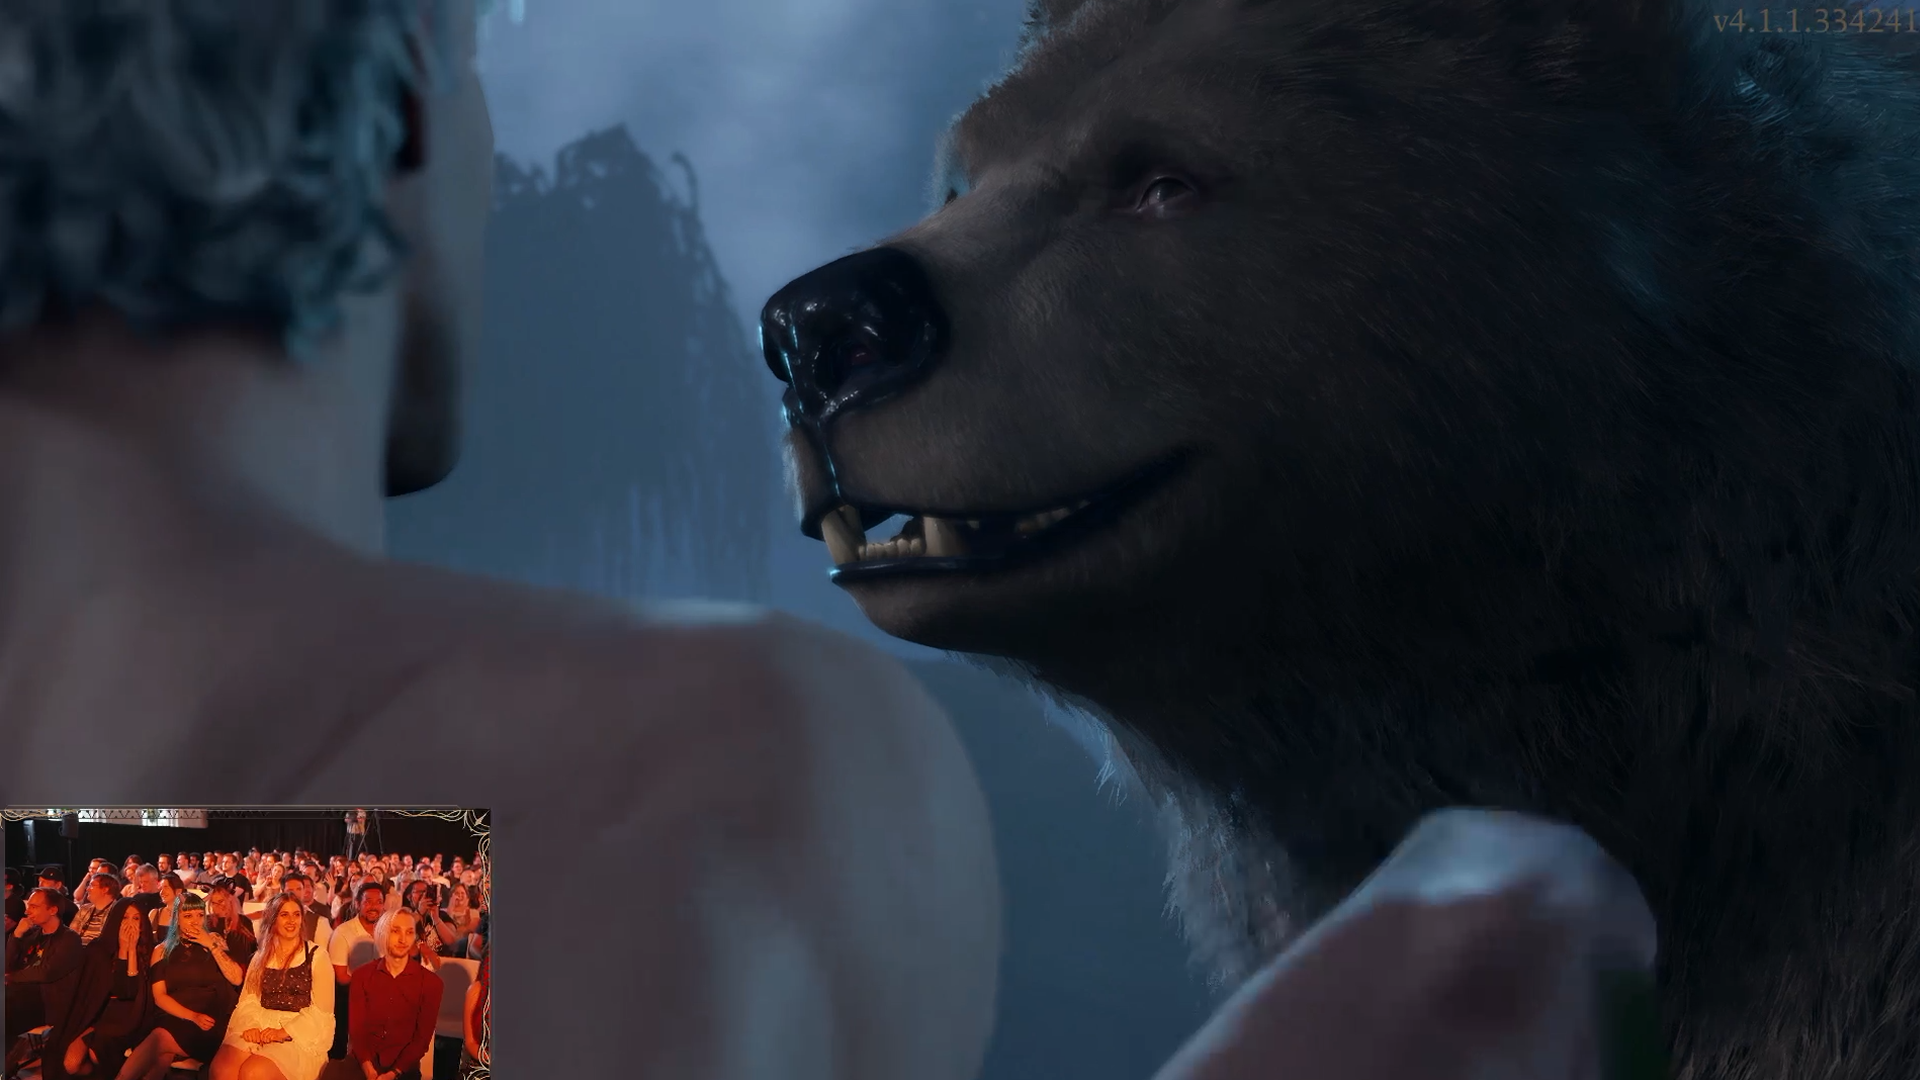 A screen capture shows a moment from the Baldur’s Gate 3 scene where Halsin the druid approaches, in bear form, to participate in sex.